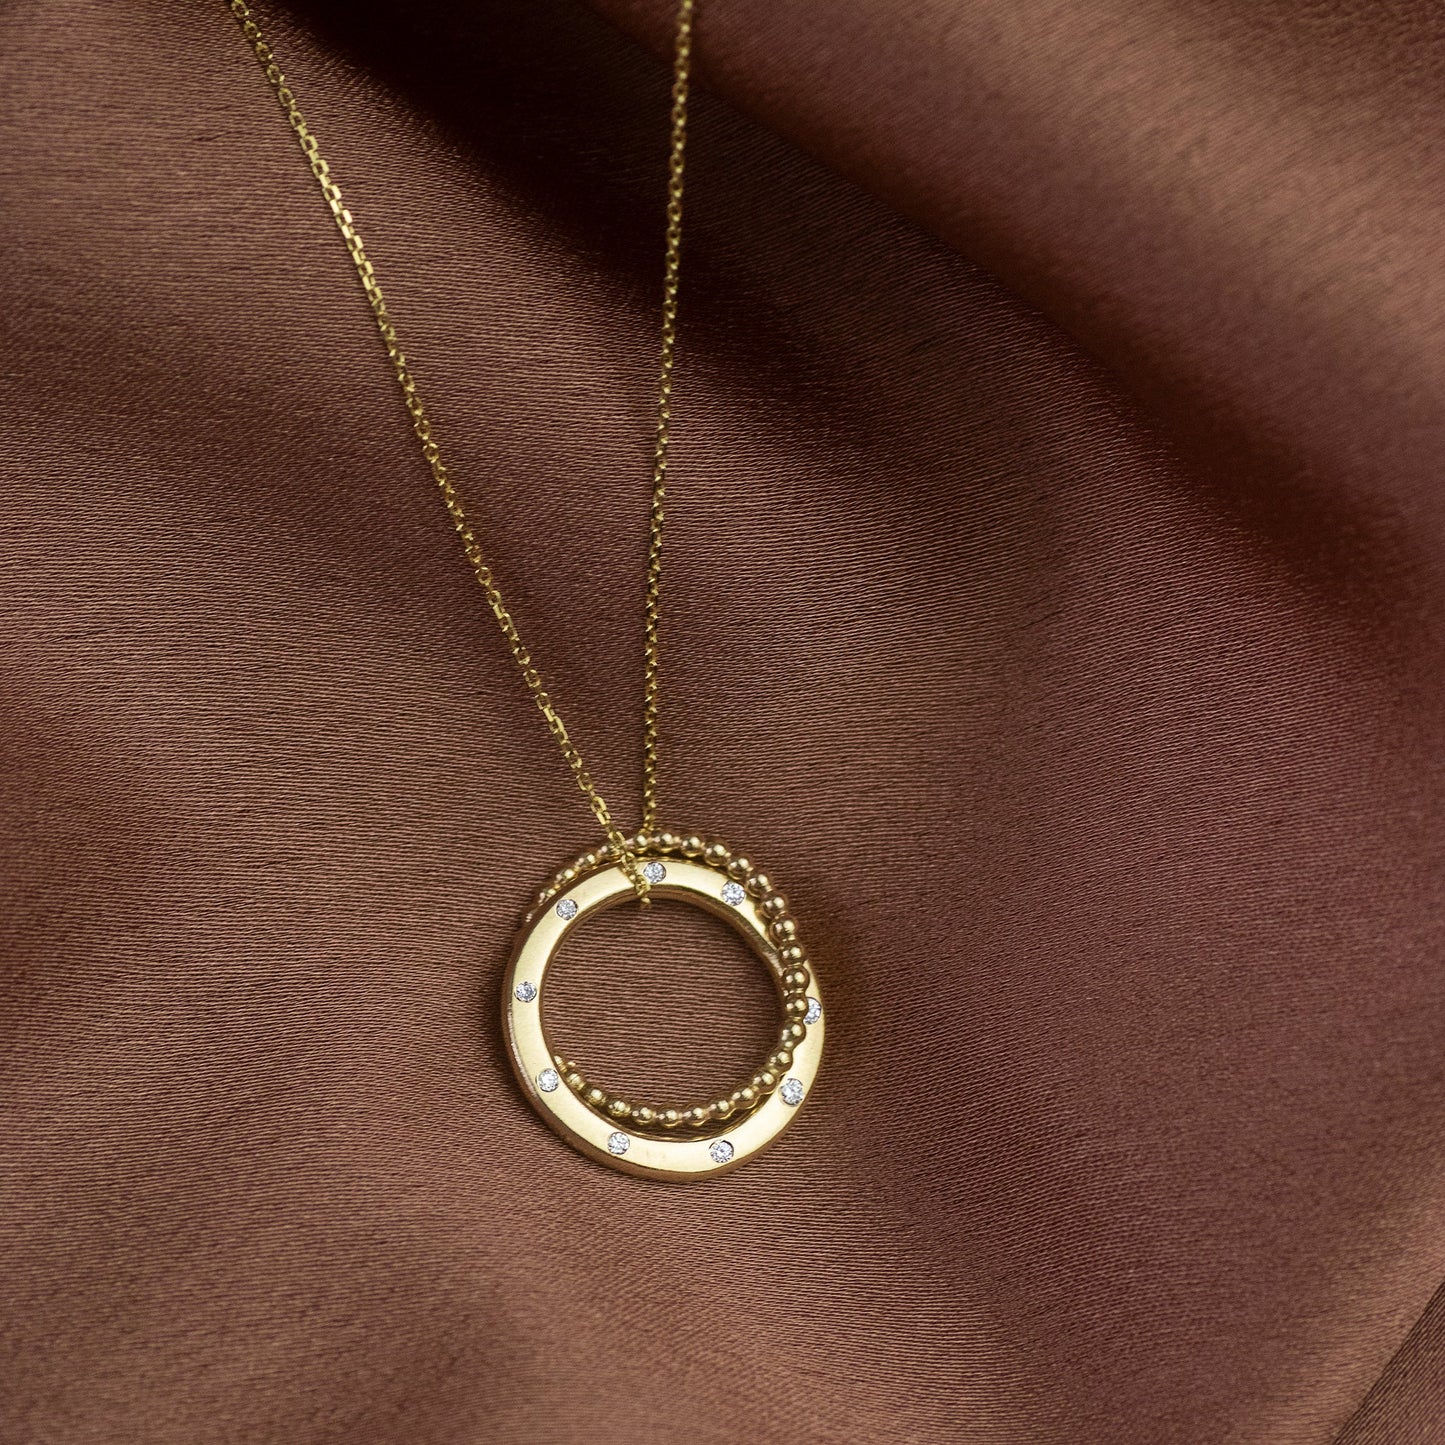 10th Anniversary Necklace - 10 Diamonds for 10 Years - 9kt Gold